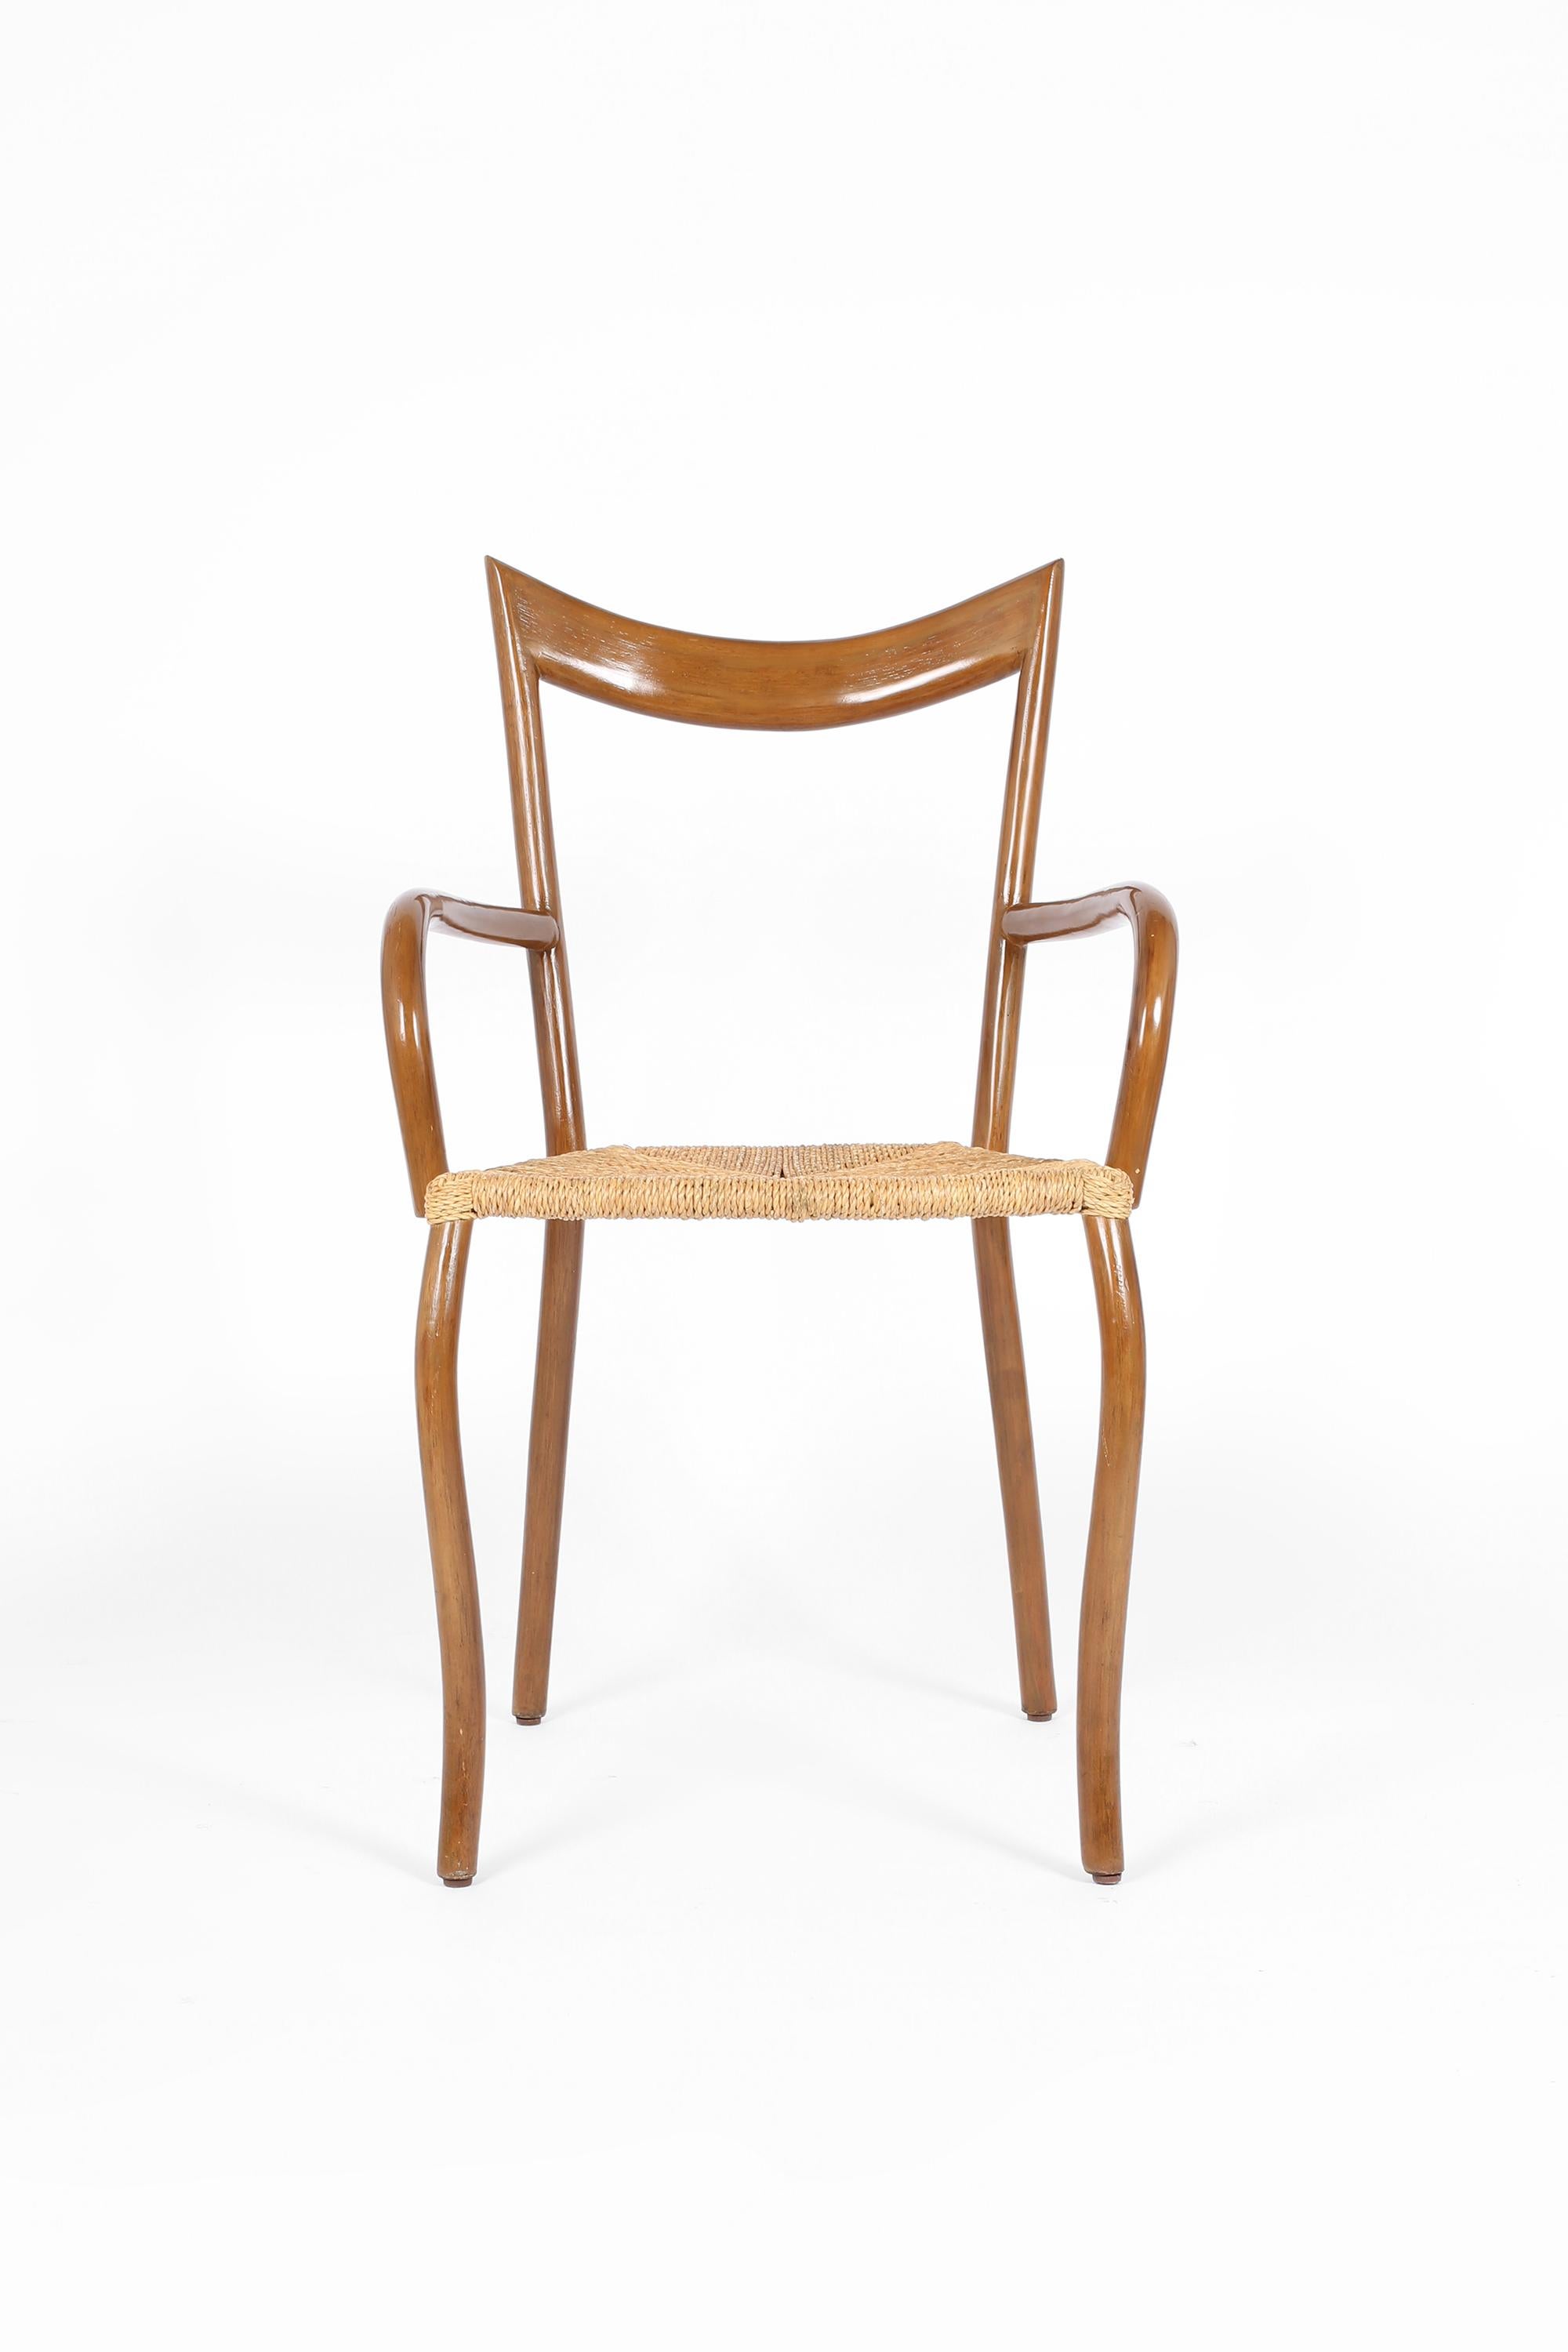 A rare set of six ‘Manila’ carver dining chairs by Filipino designer Val Padilla. The shapely varnished wooden frame features a steel inner core, with seats woven in seagrass. Retailed in the UK by Conran, c. 1980s.